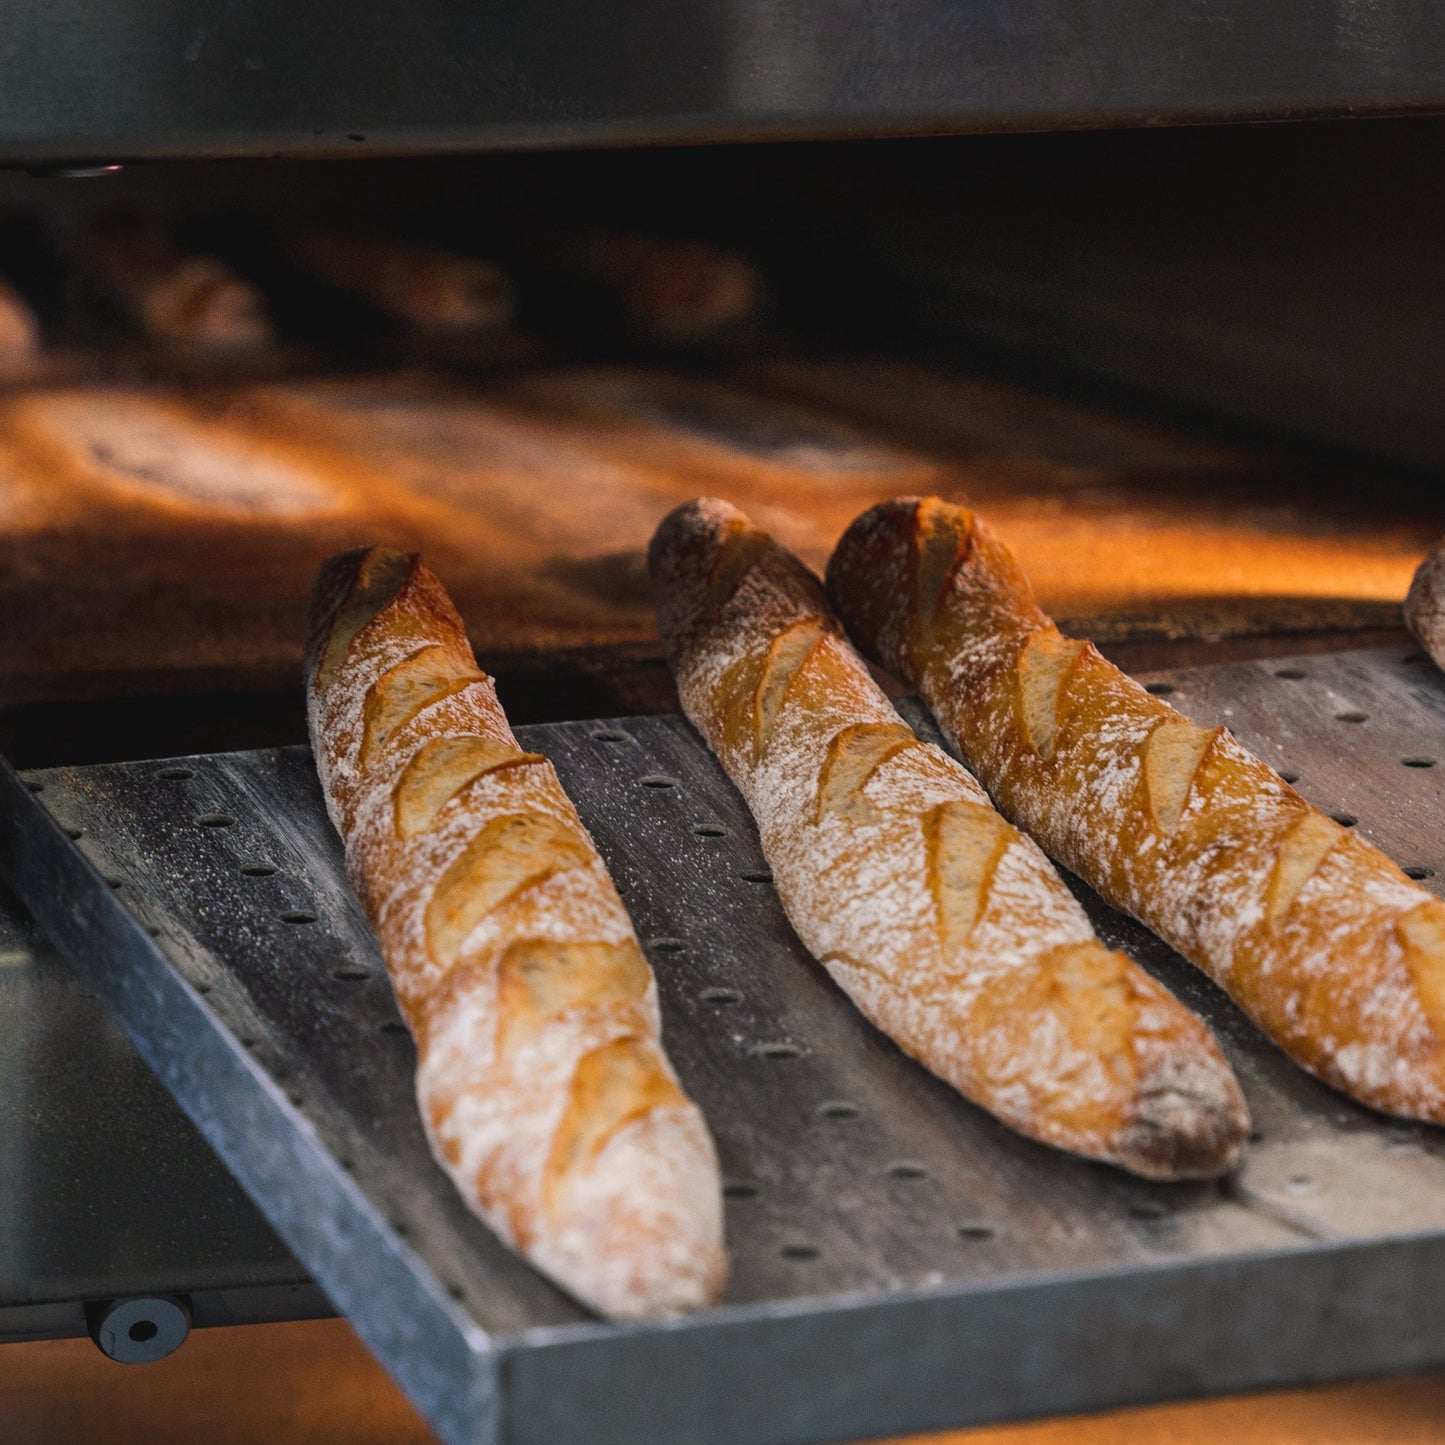 Three Gérard baguettes baked to perfection inside a hot oven, filling the air with a delightful scent.